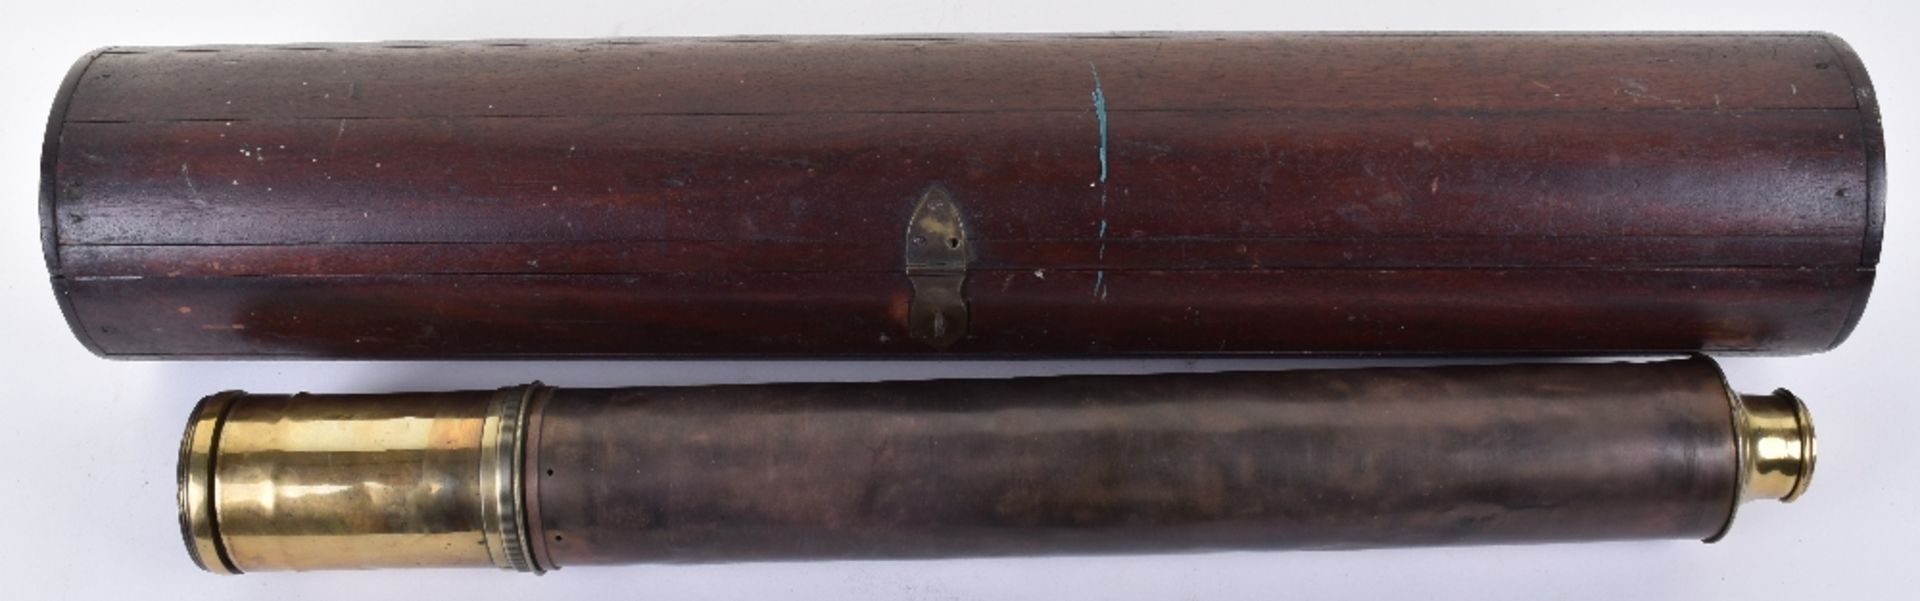 2 drawer brass telescope engraved ROYAL NATIONAL LIFEBOAT INSTITUTION 1861, Dolland London Day or Ni - Image 2 of 4